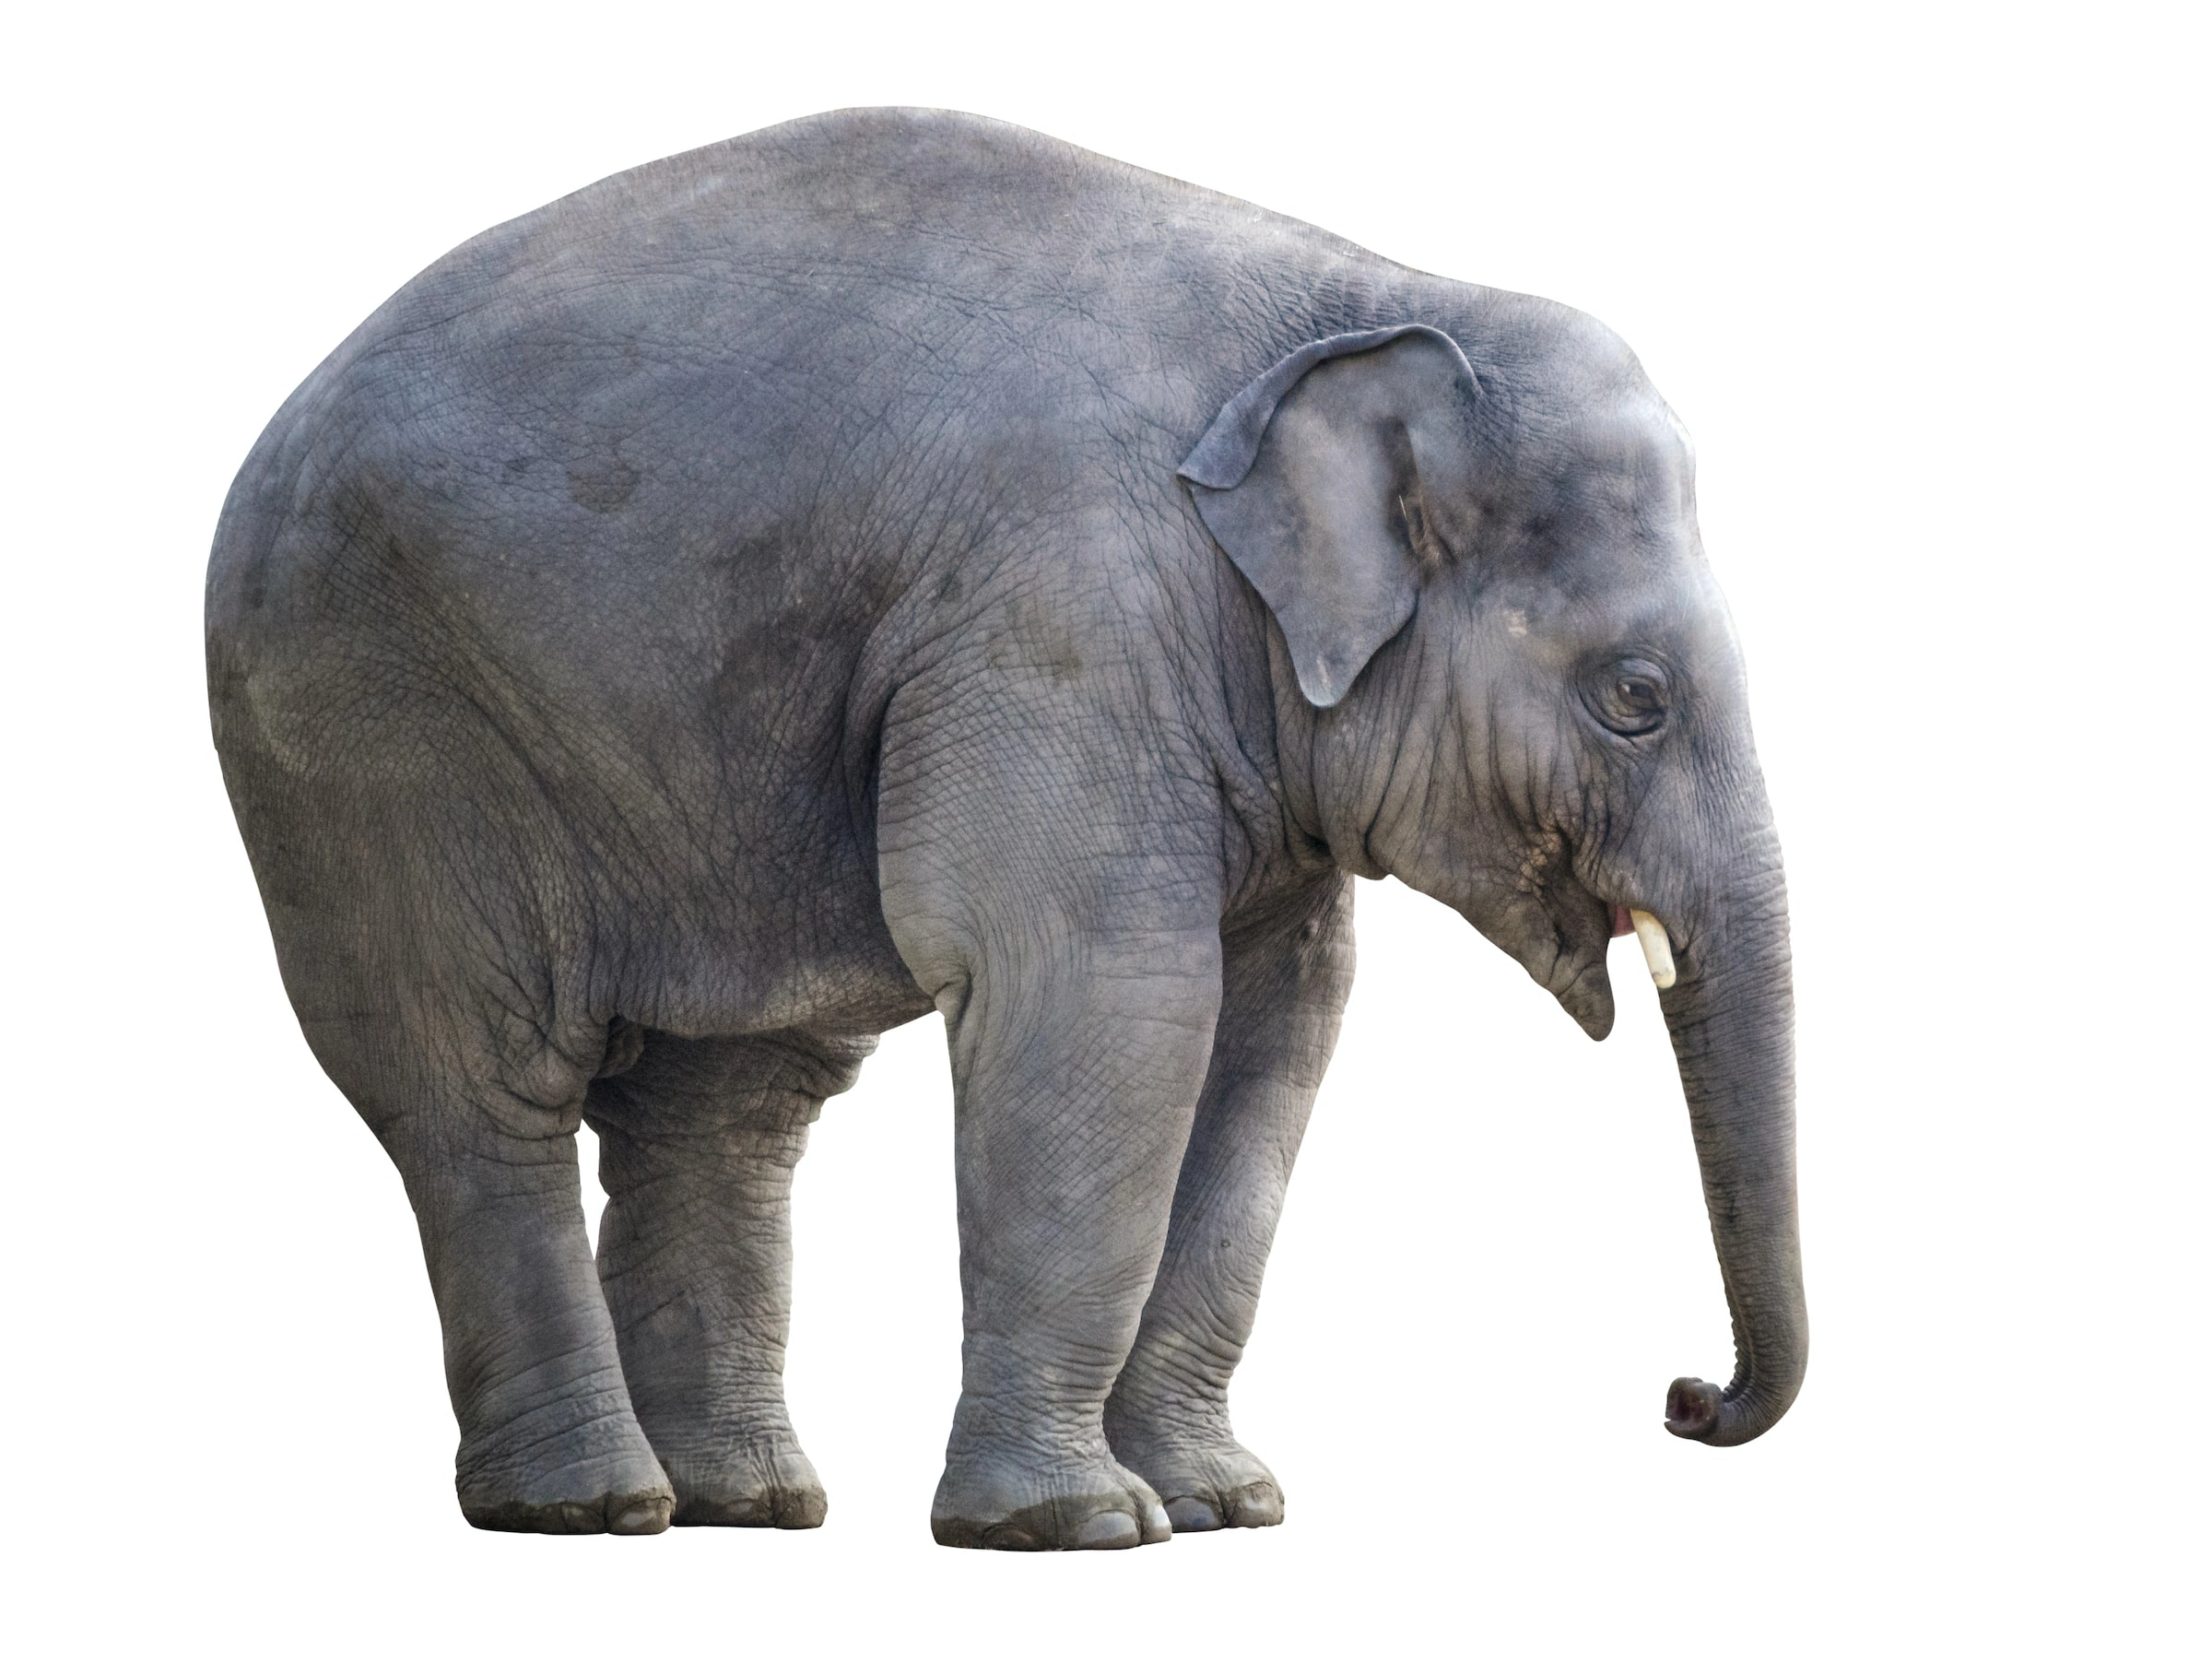 image of an elephant in a room as a metaphor for racism